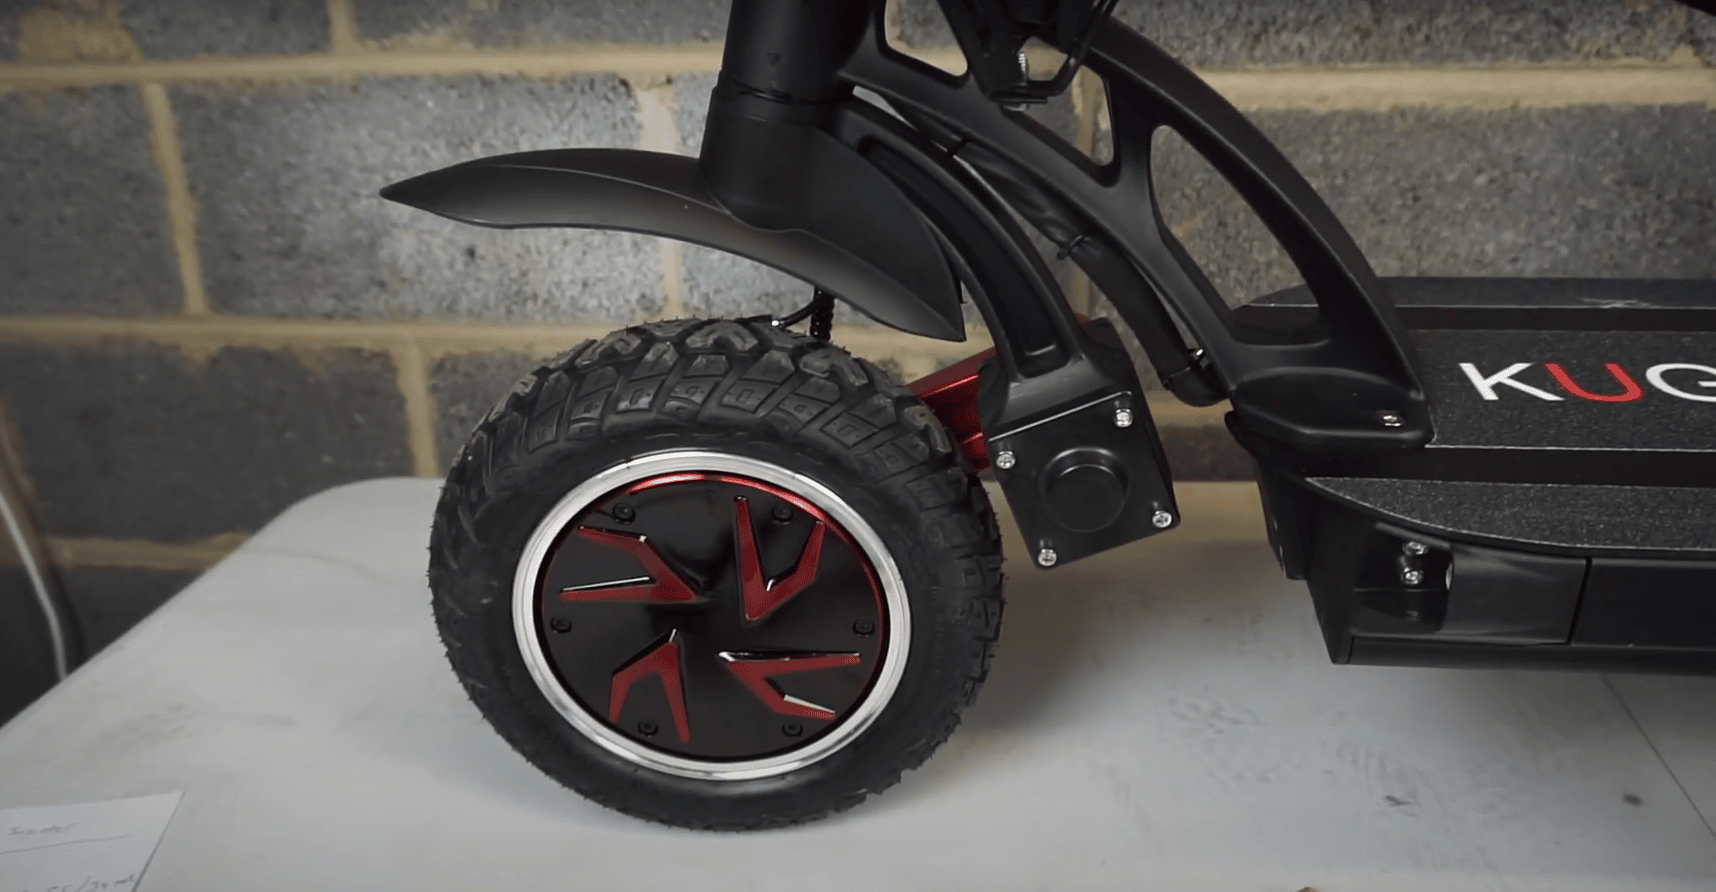 Kugoo G-Booster folding electric scooter